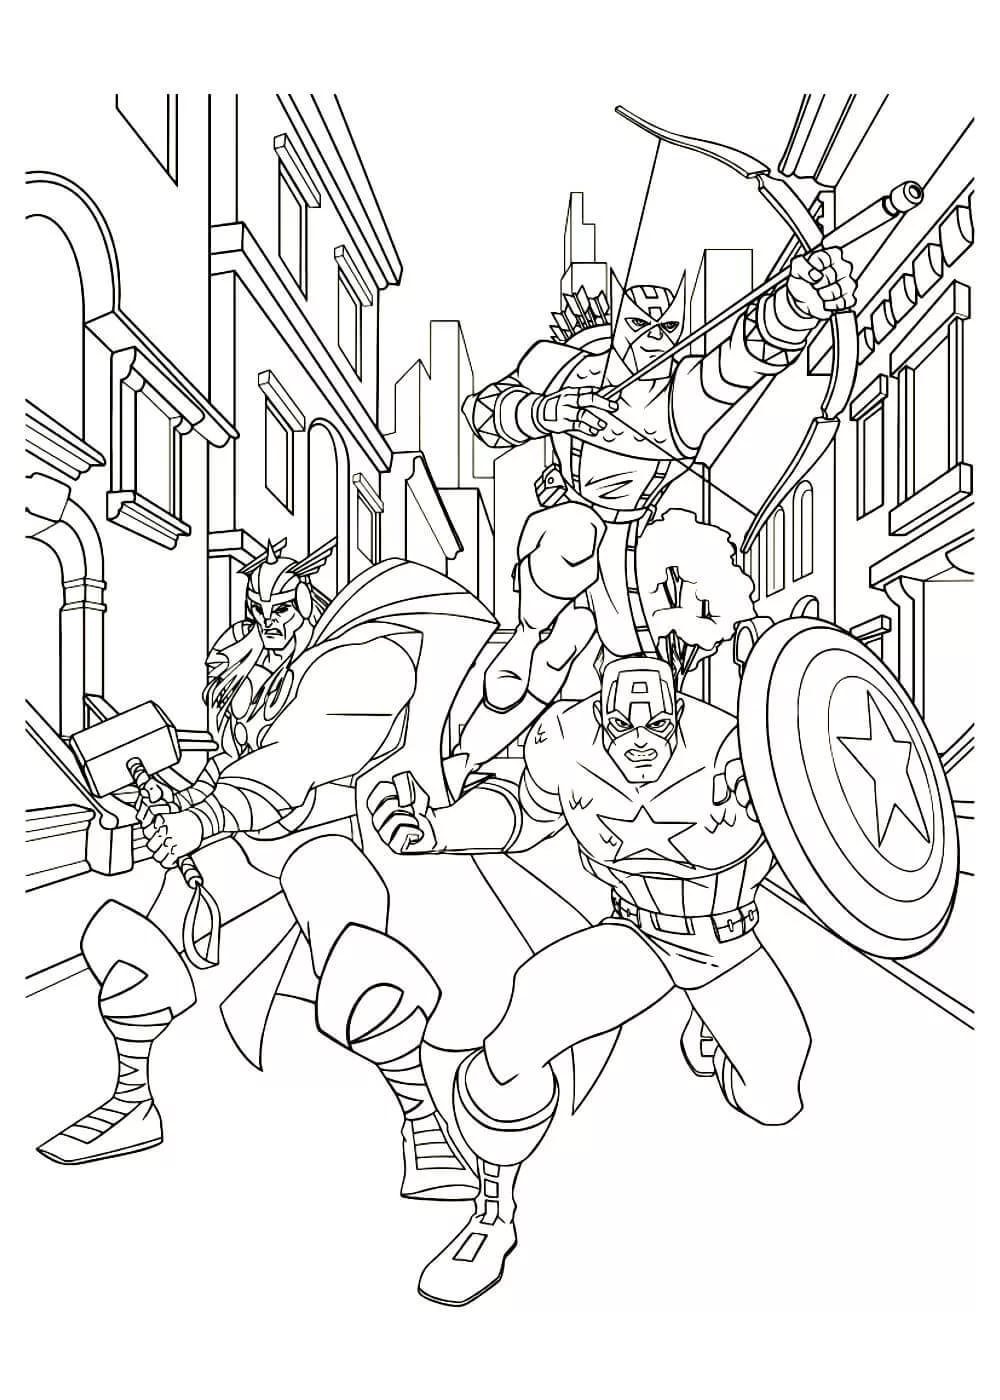 Drawing 03 of Avengers to print and color